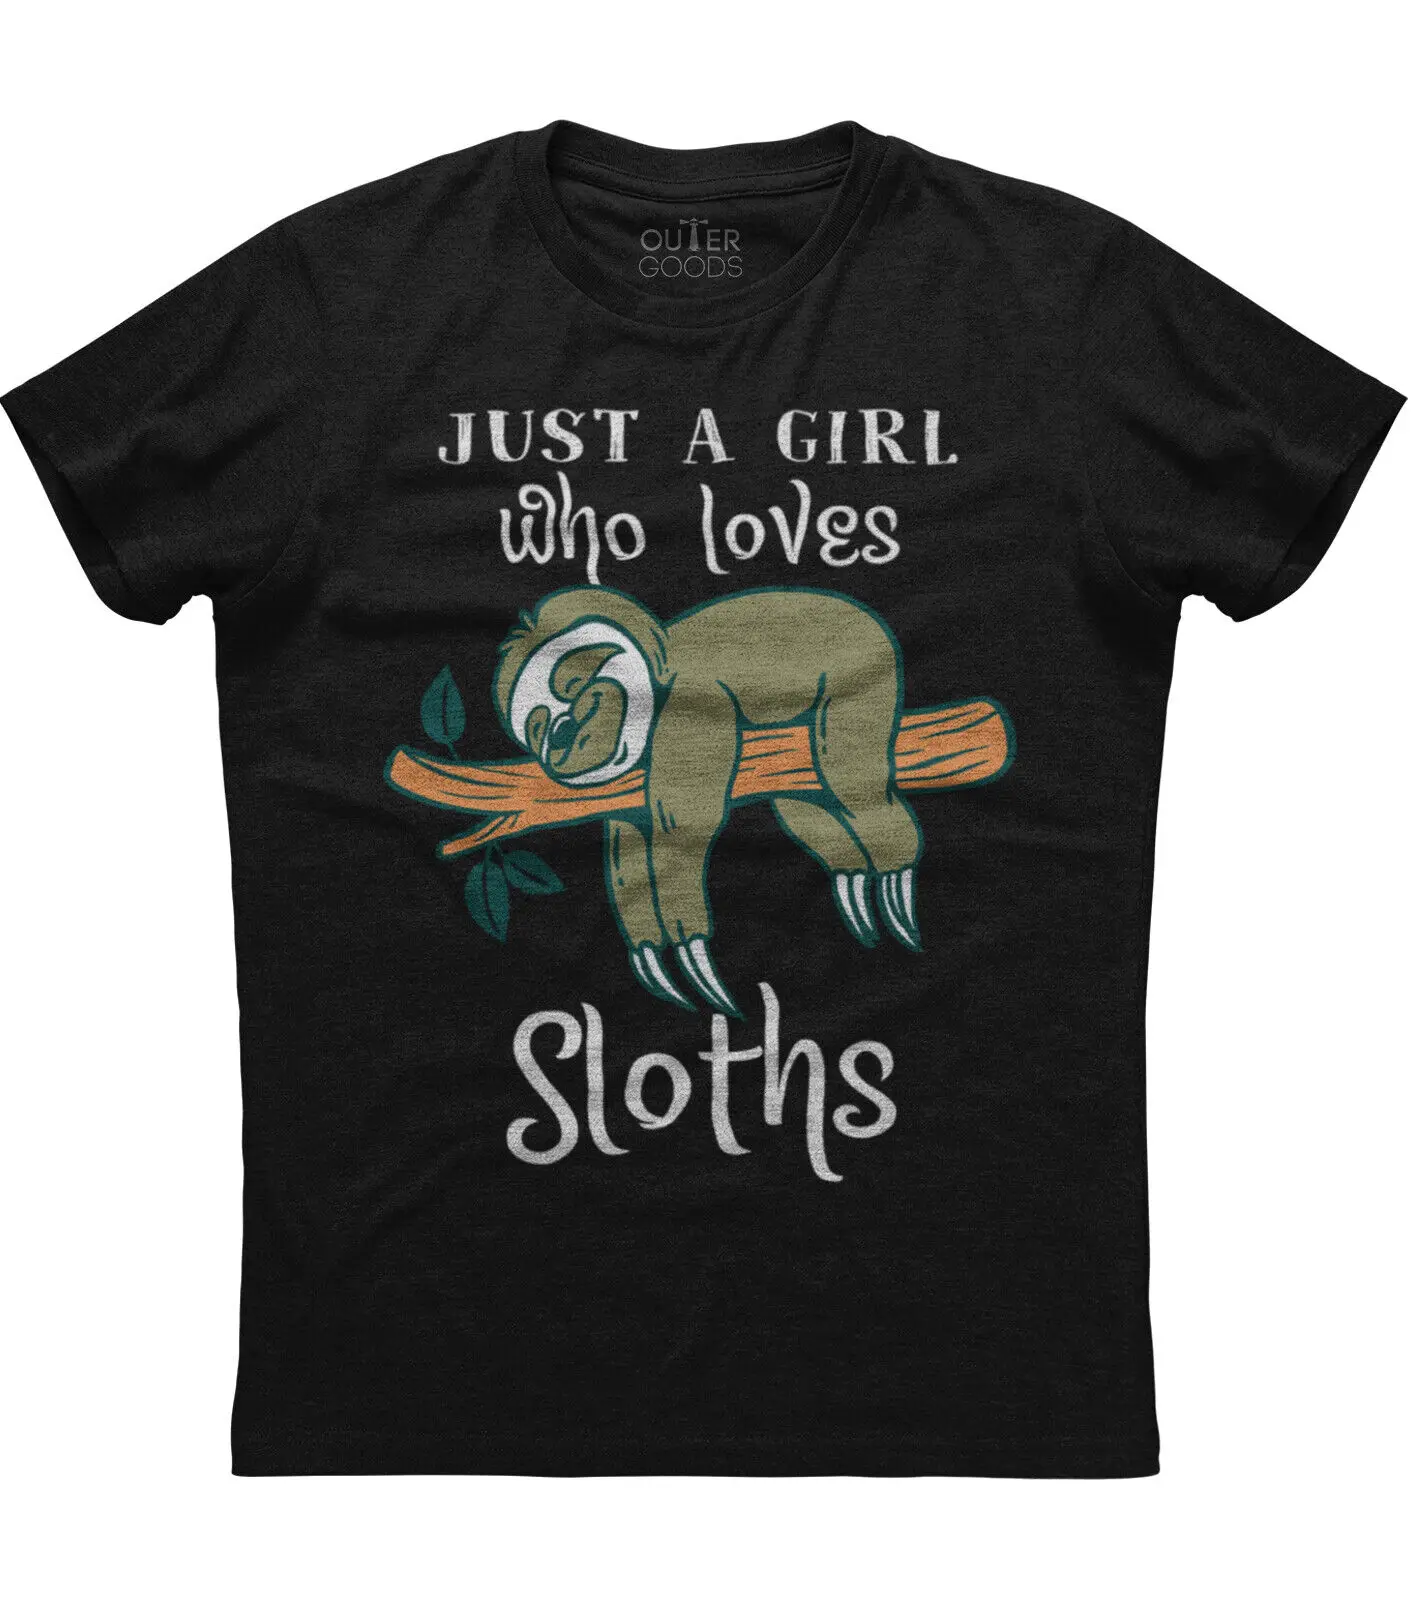 

Just A Girl Who Loves Sloths Funny Short O-Neck Cotton T Shirt Men Casual Short Sleeve Tees Tops Camisetas Mujer